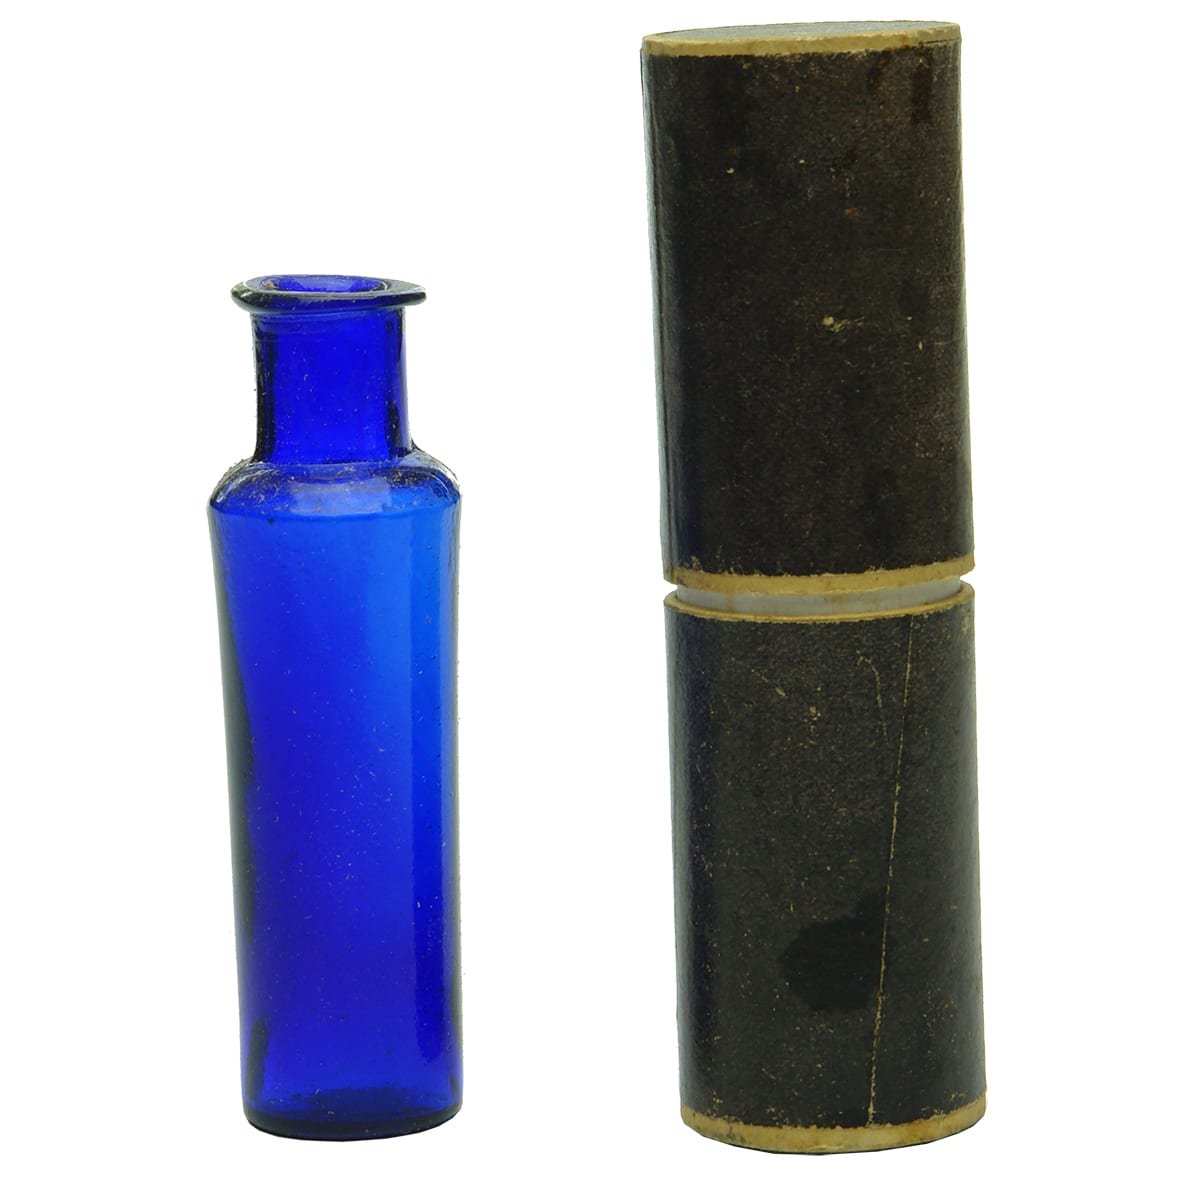 Poison. Flared lip cylinder in cardboard container.